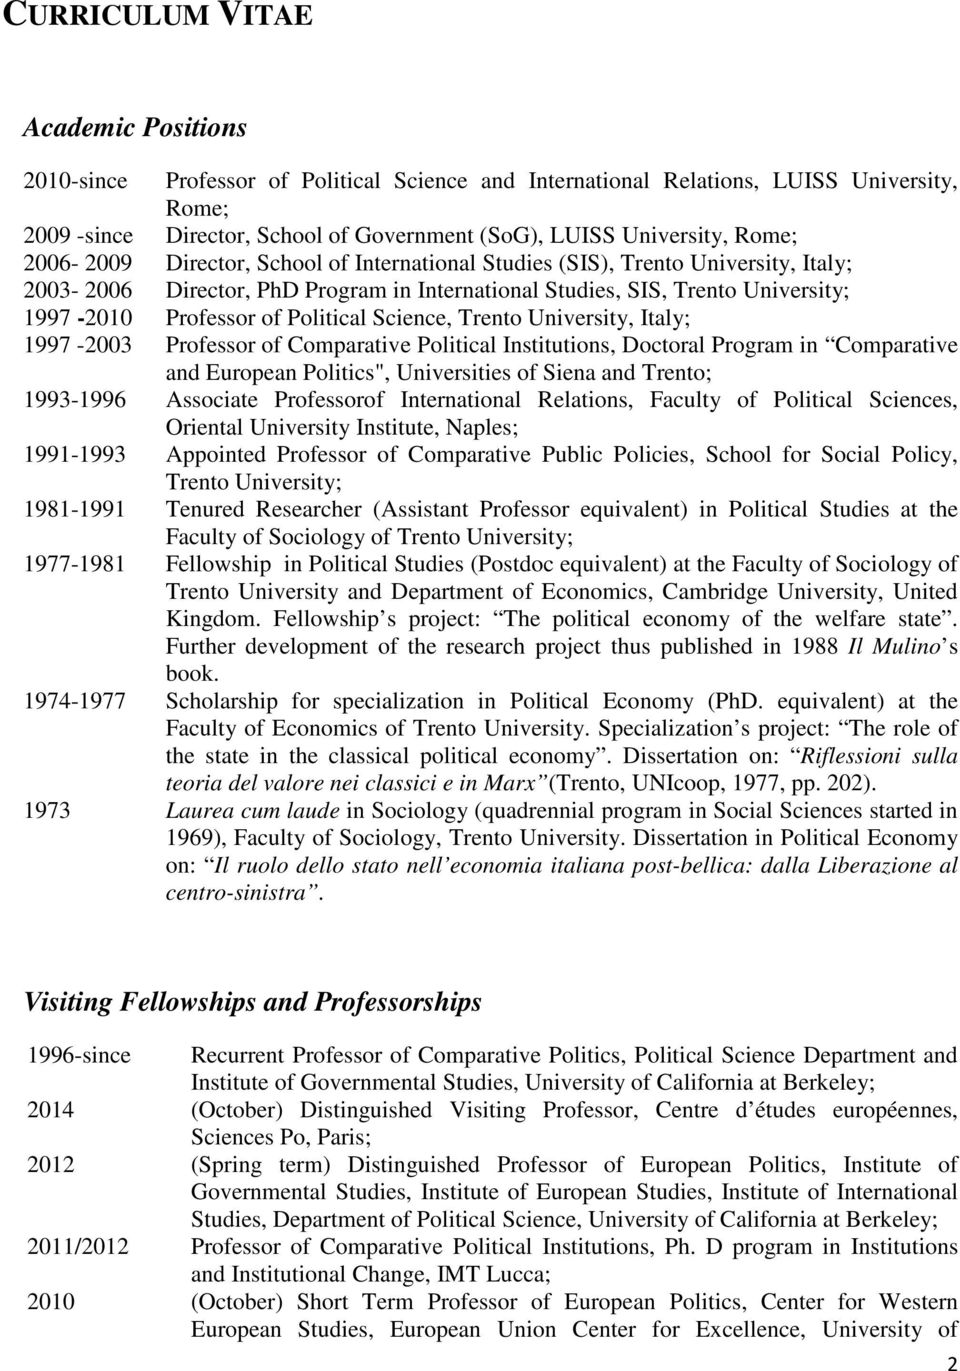 Political Science, Trento University, Italy; 1997-2003 Professor of Comparative Political Institutions, Doctoral Program in Comparative and European Politics", Universities of Siena and Trento;